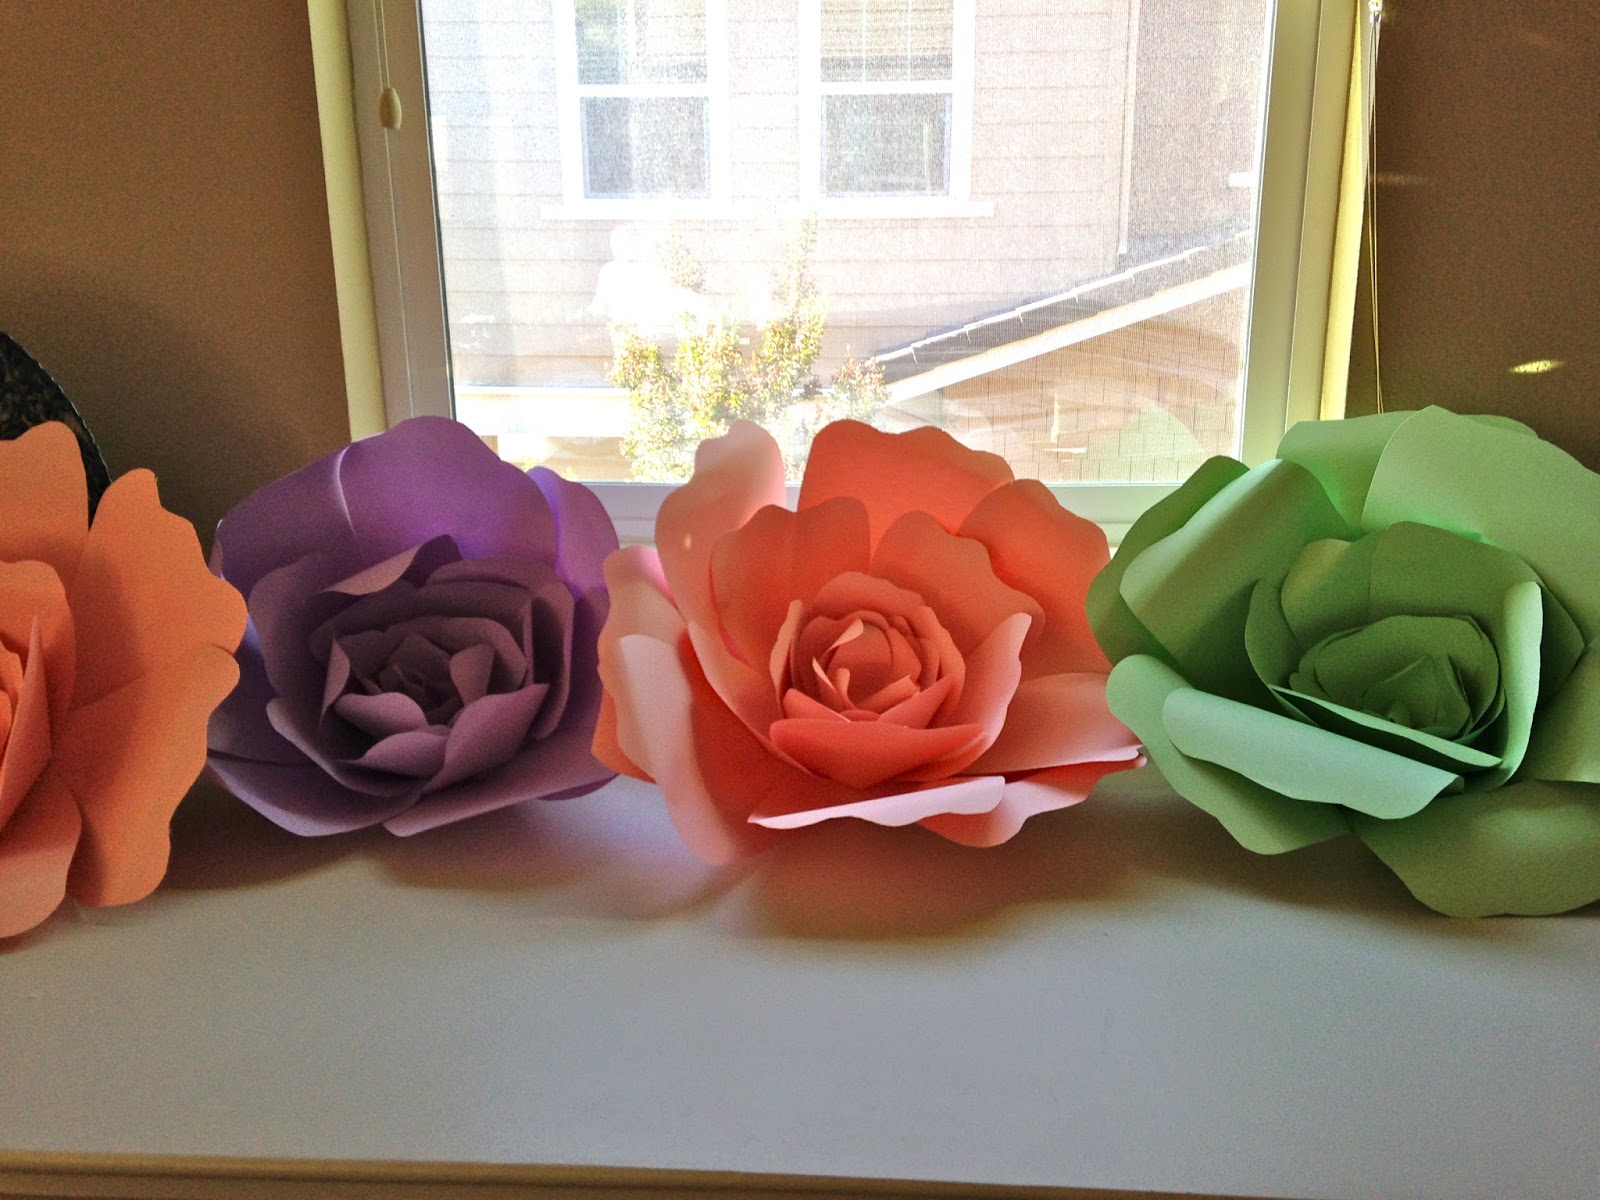 How to Make Large Paper Flowers